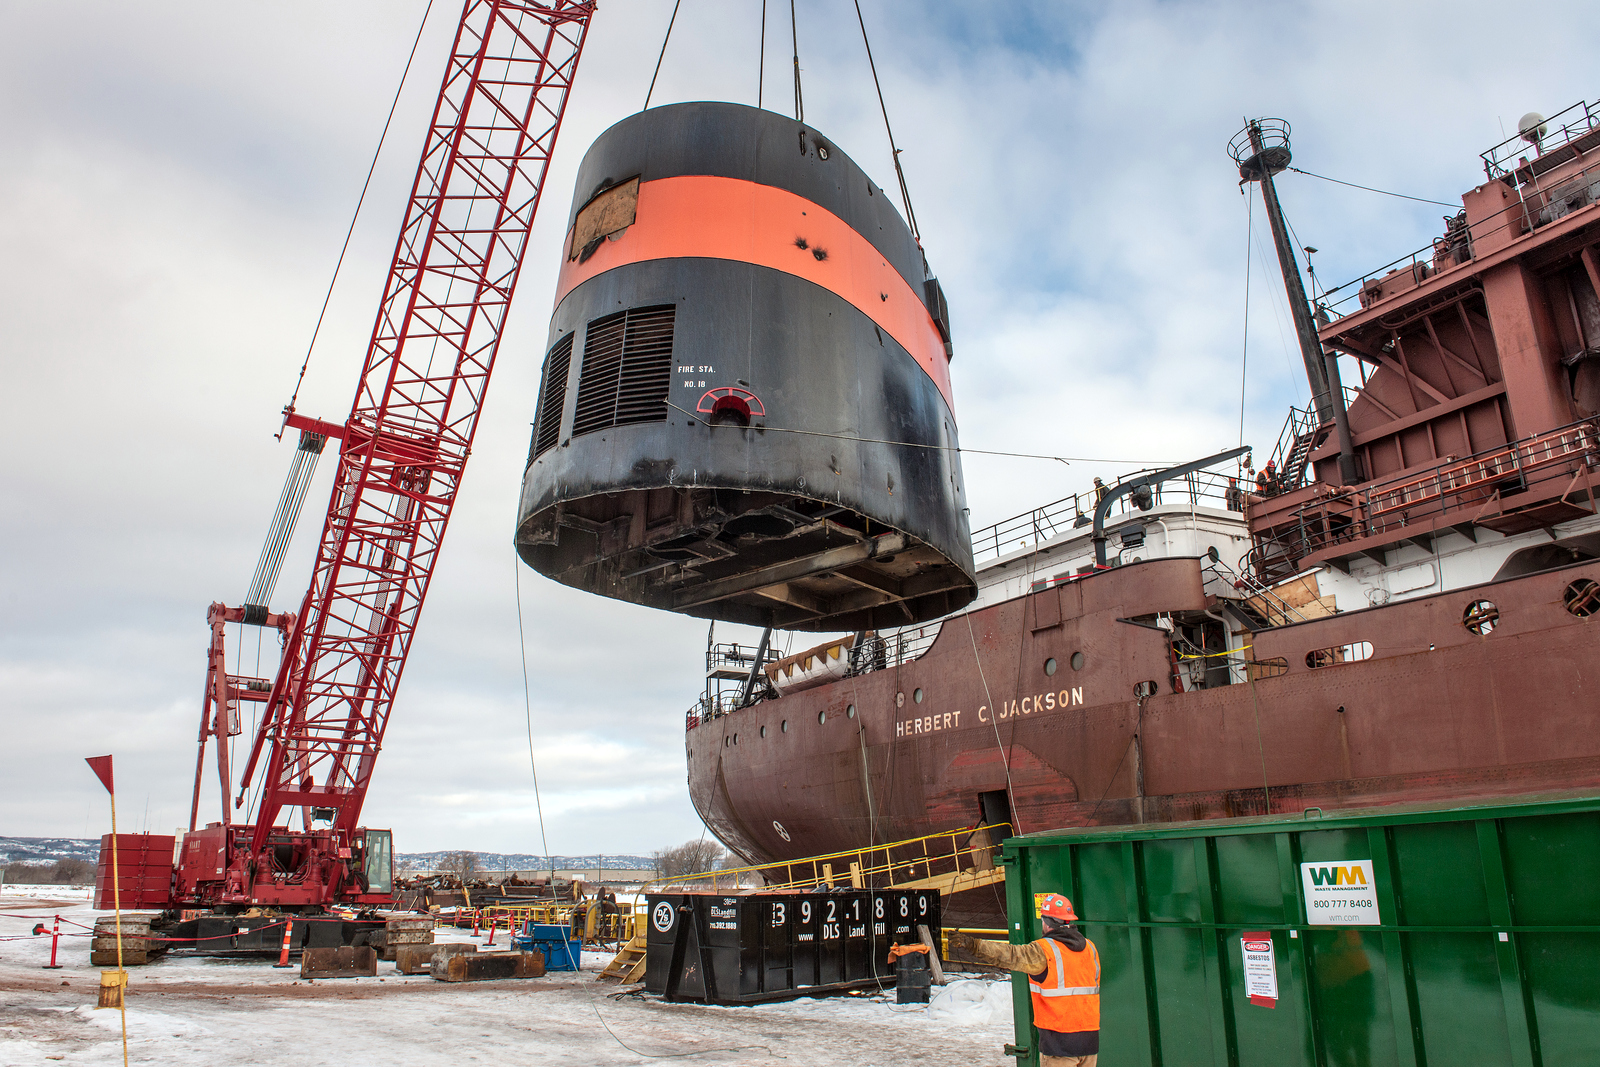 Fraser Shipyards has nearly 70 people dedicated to repowering the Herbert C. Jackson. Crews removed the ship’s stack to extract the boilers and steam propulsion plant before being able to lower in two, new dual-fuel diesel engines later this month. Credit: Robert Welton